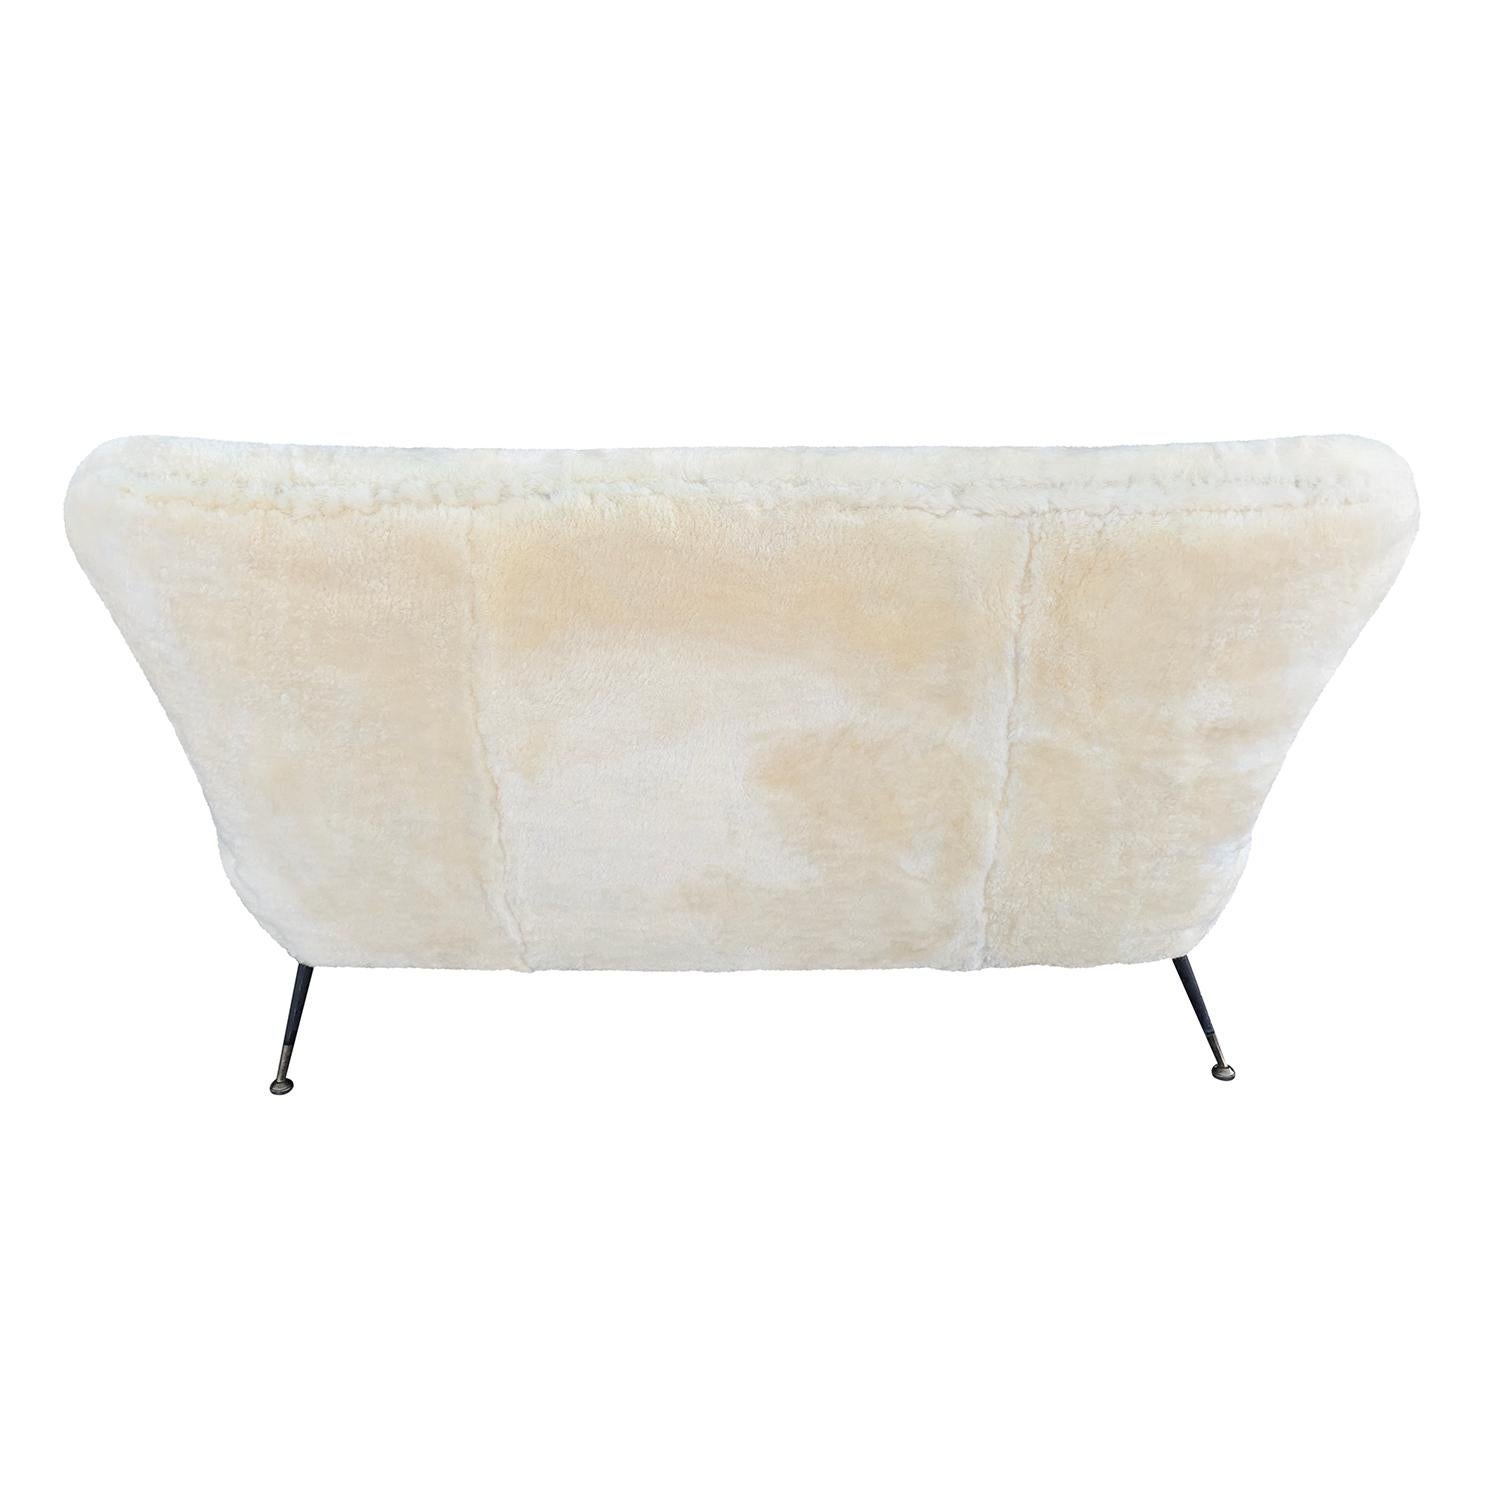 Hand-Crafted 20th Century Sheepskin Divano, Italian Two-Seat Sofa Attributed to Paolo Buffa For Sale